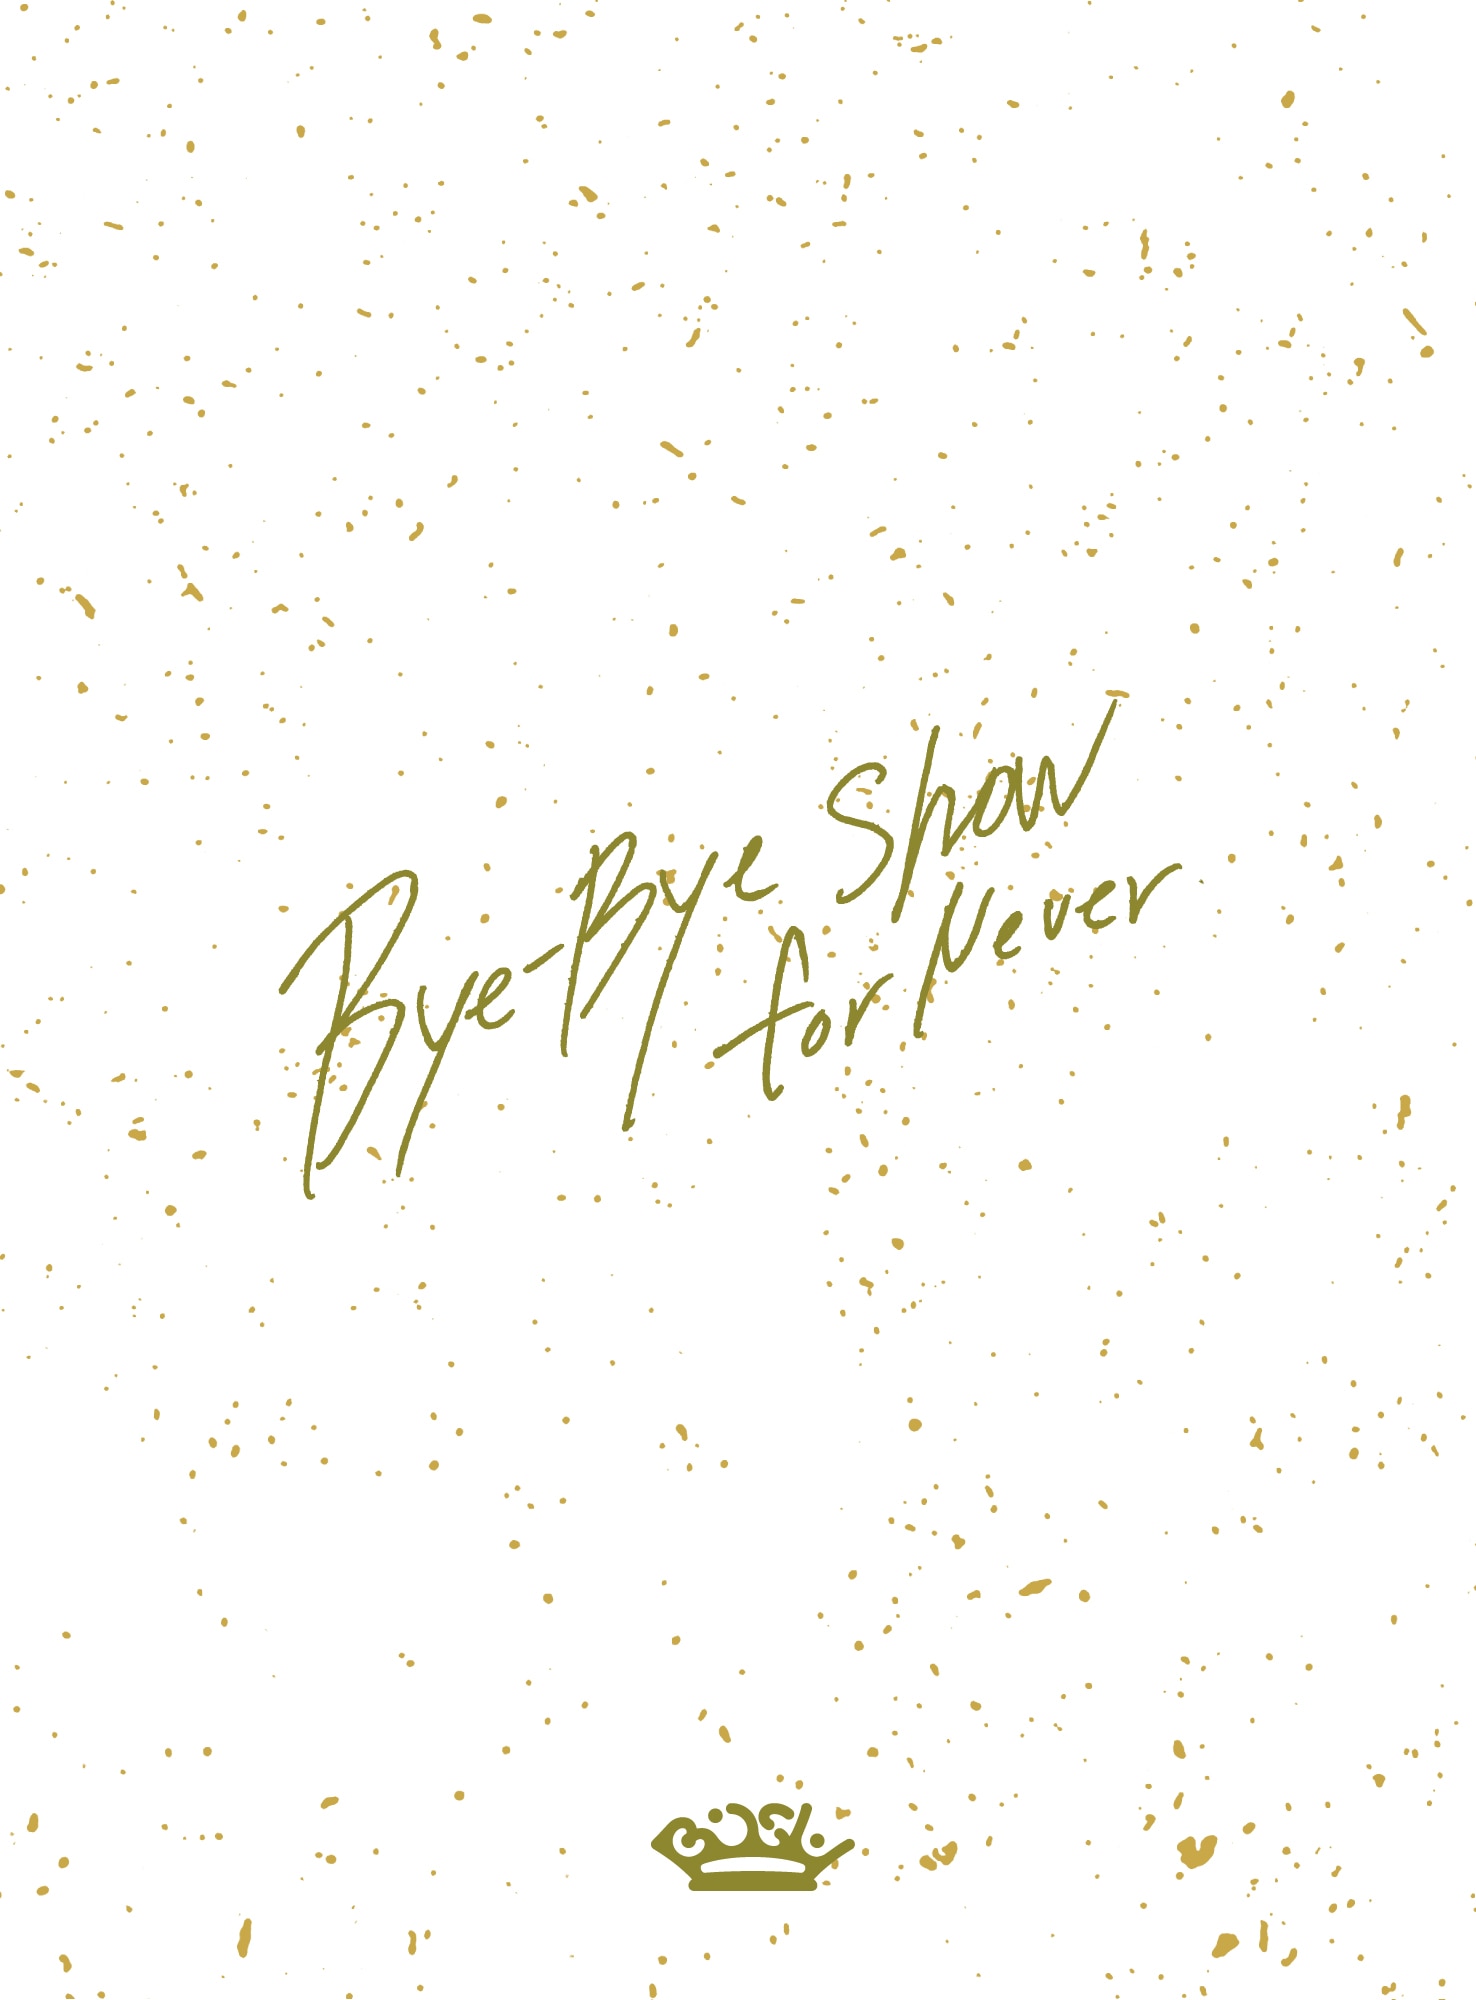 Bye-Bye Show for Never at TOKYO DOME